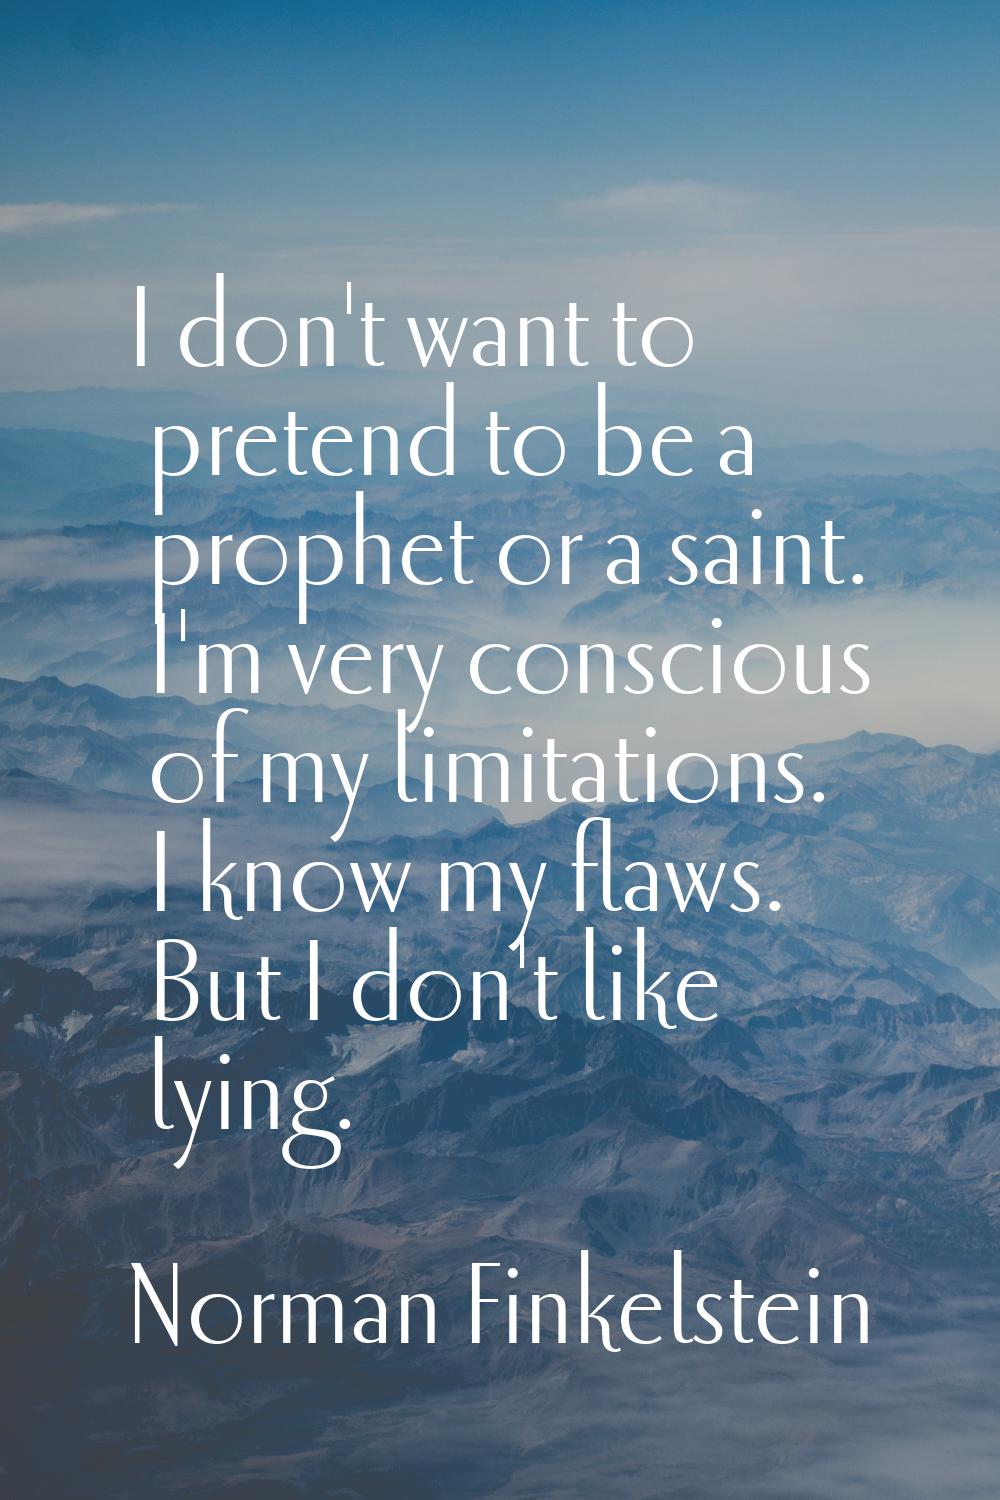 I don't want to pretend to be a prophet or a saint. I'm very conscious of my limitations. I know my